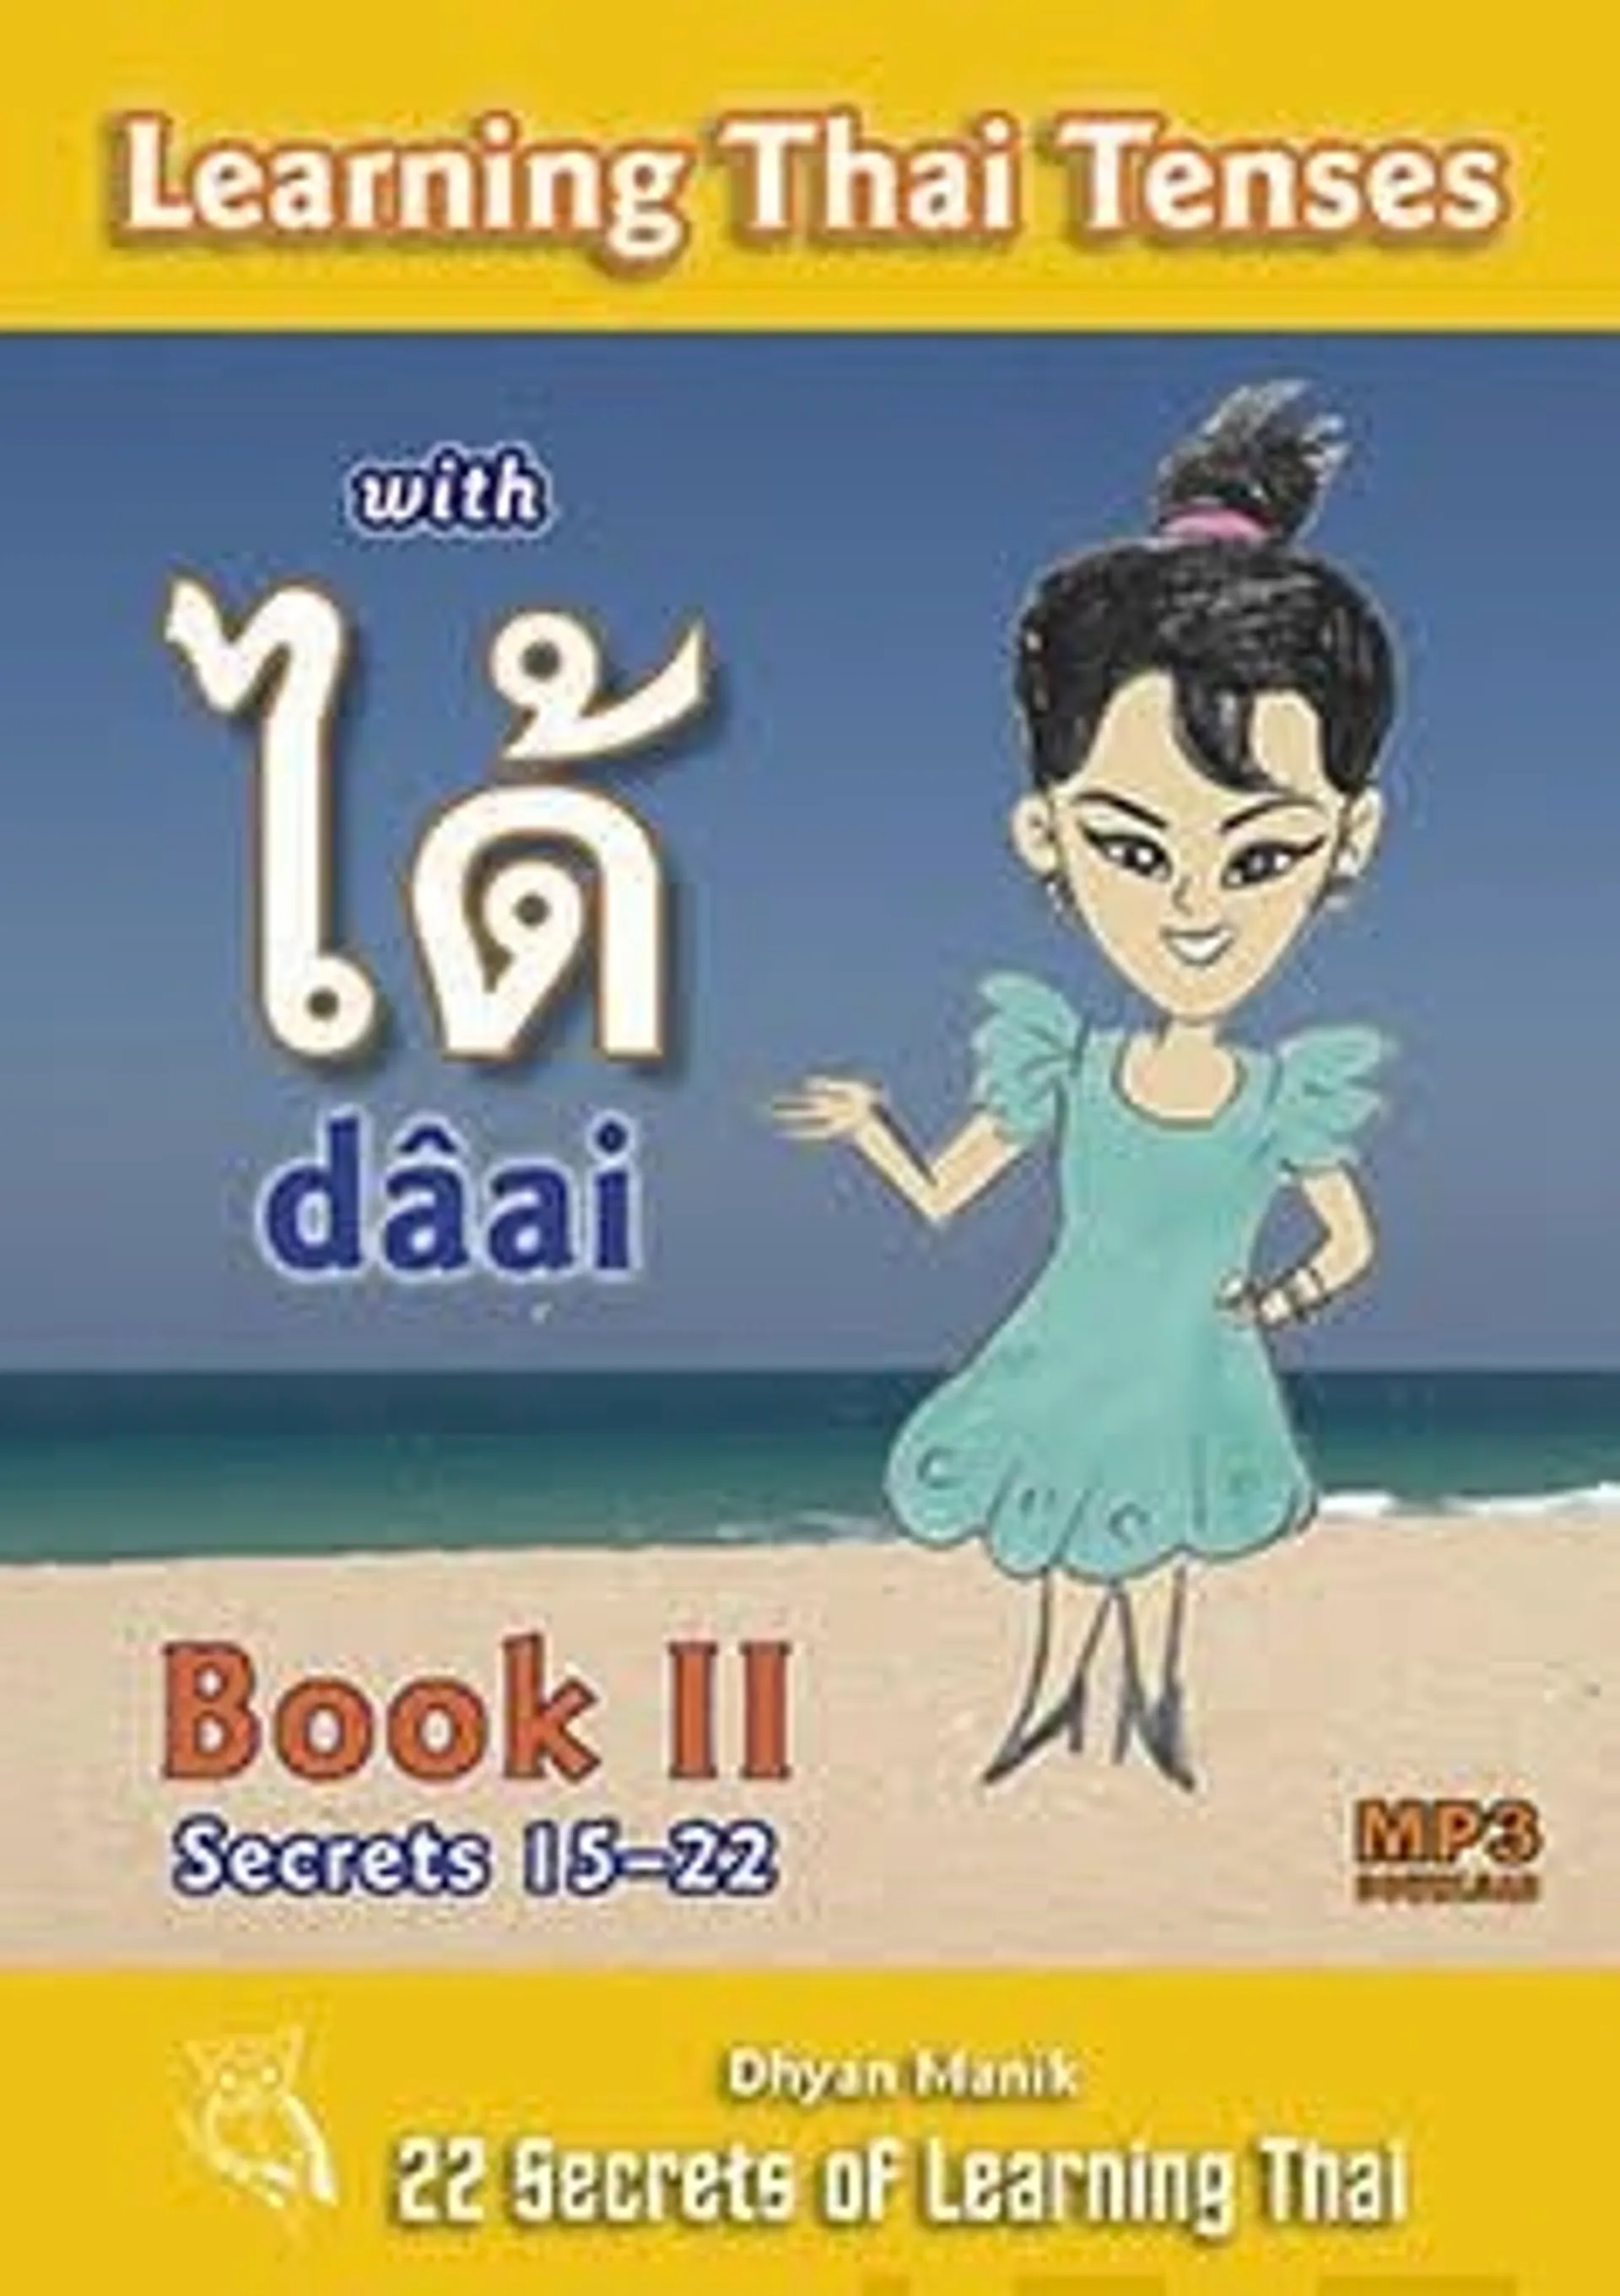 Manik, Learning Thai Tenses with dâai - Book II (+MP3 Download)